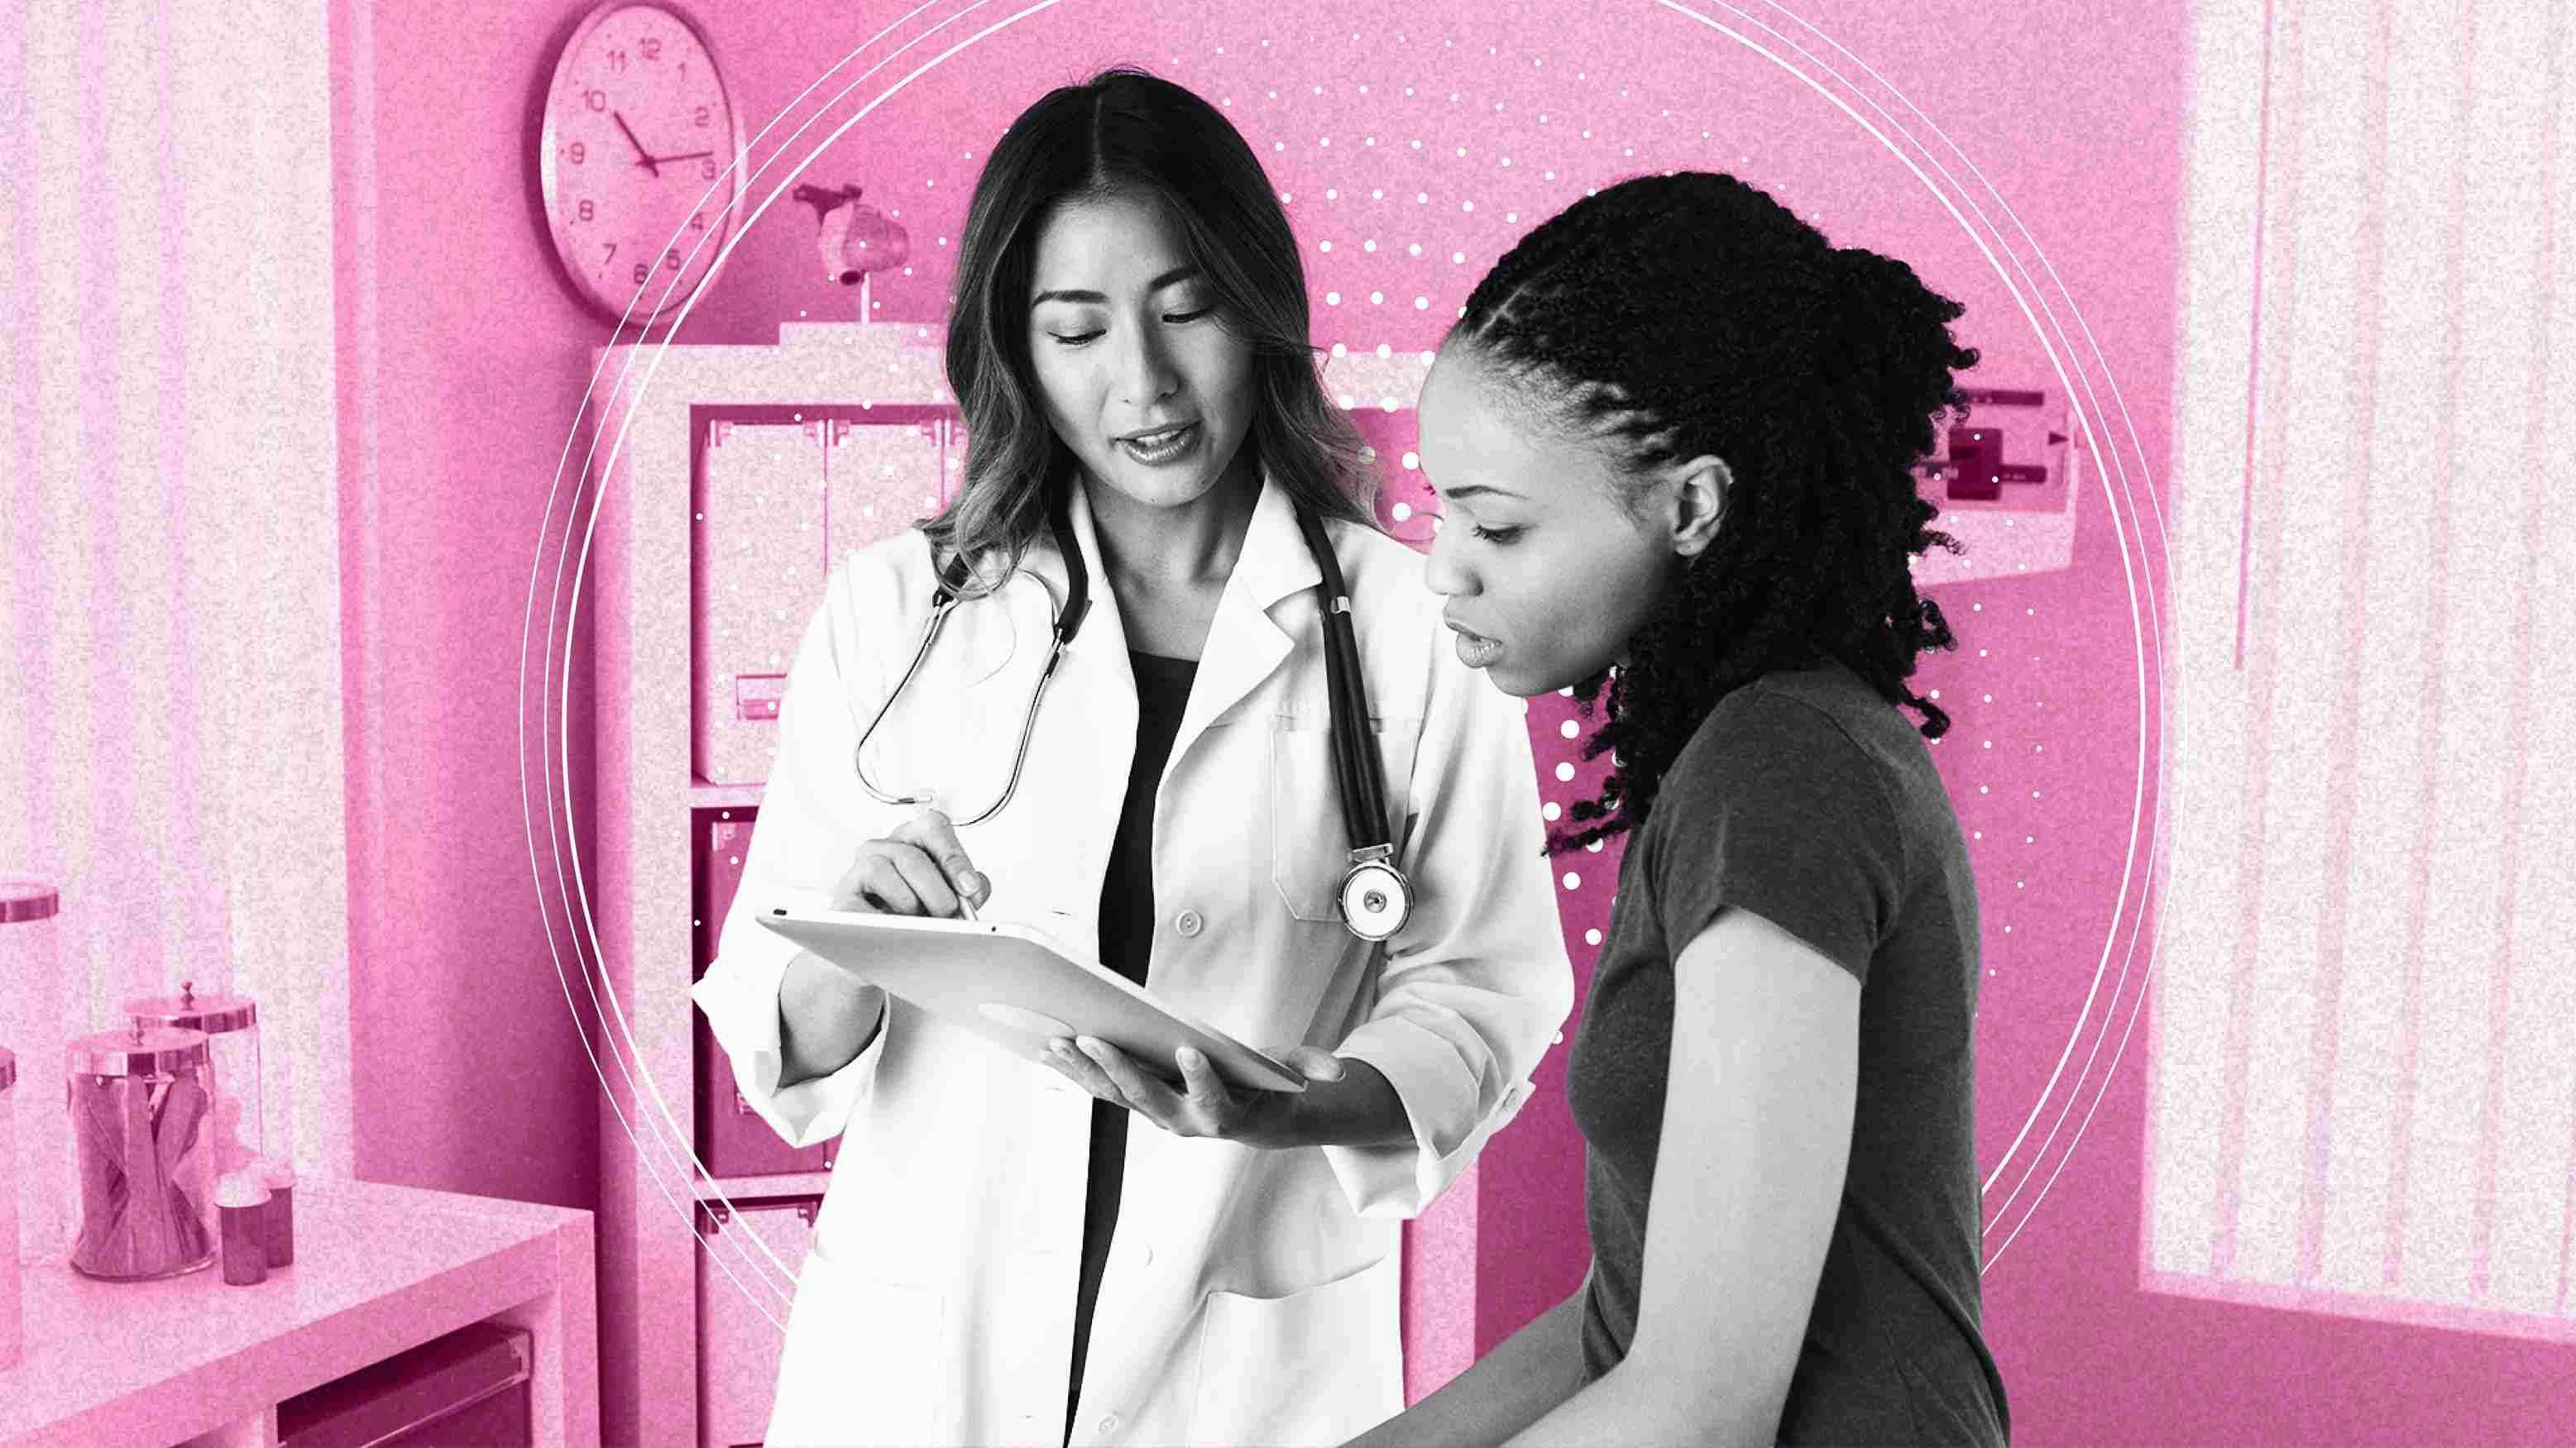 Spite tracking: Why it’s happening and how it’s changing women’s health care